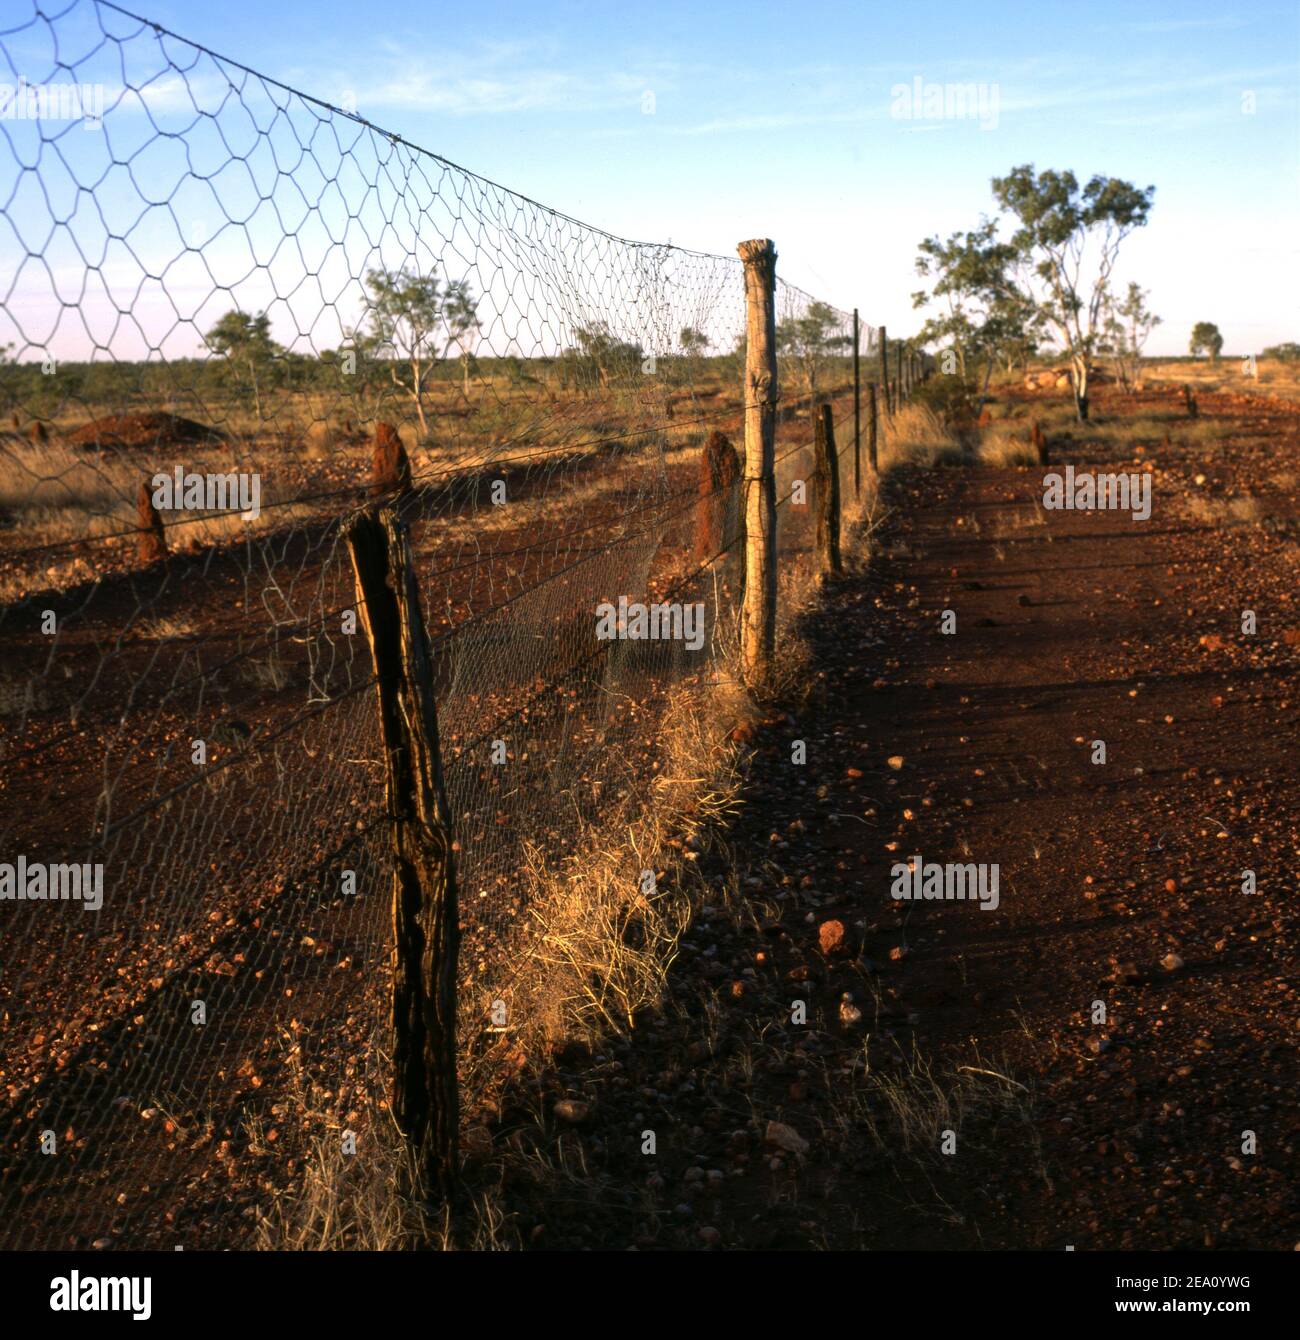 REMNANTS OF THE DOG (DINGO) FENCE OUTBACK AUSTRALIA. Stock Photo